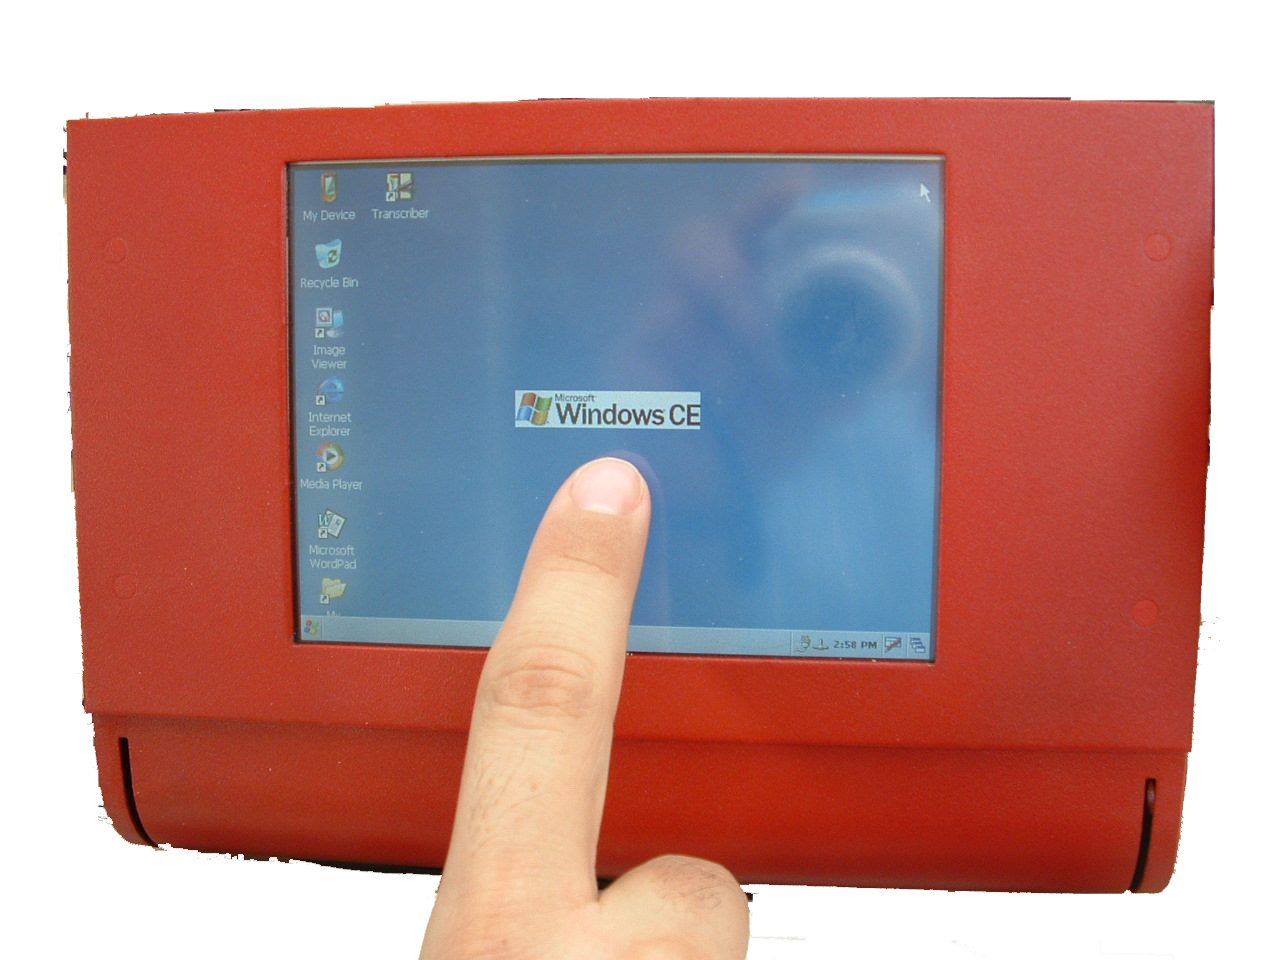 Touch panel